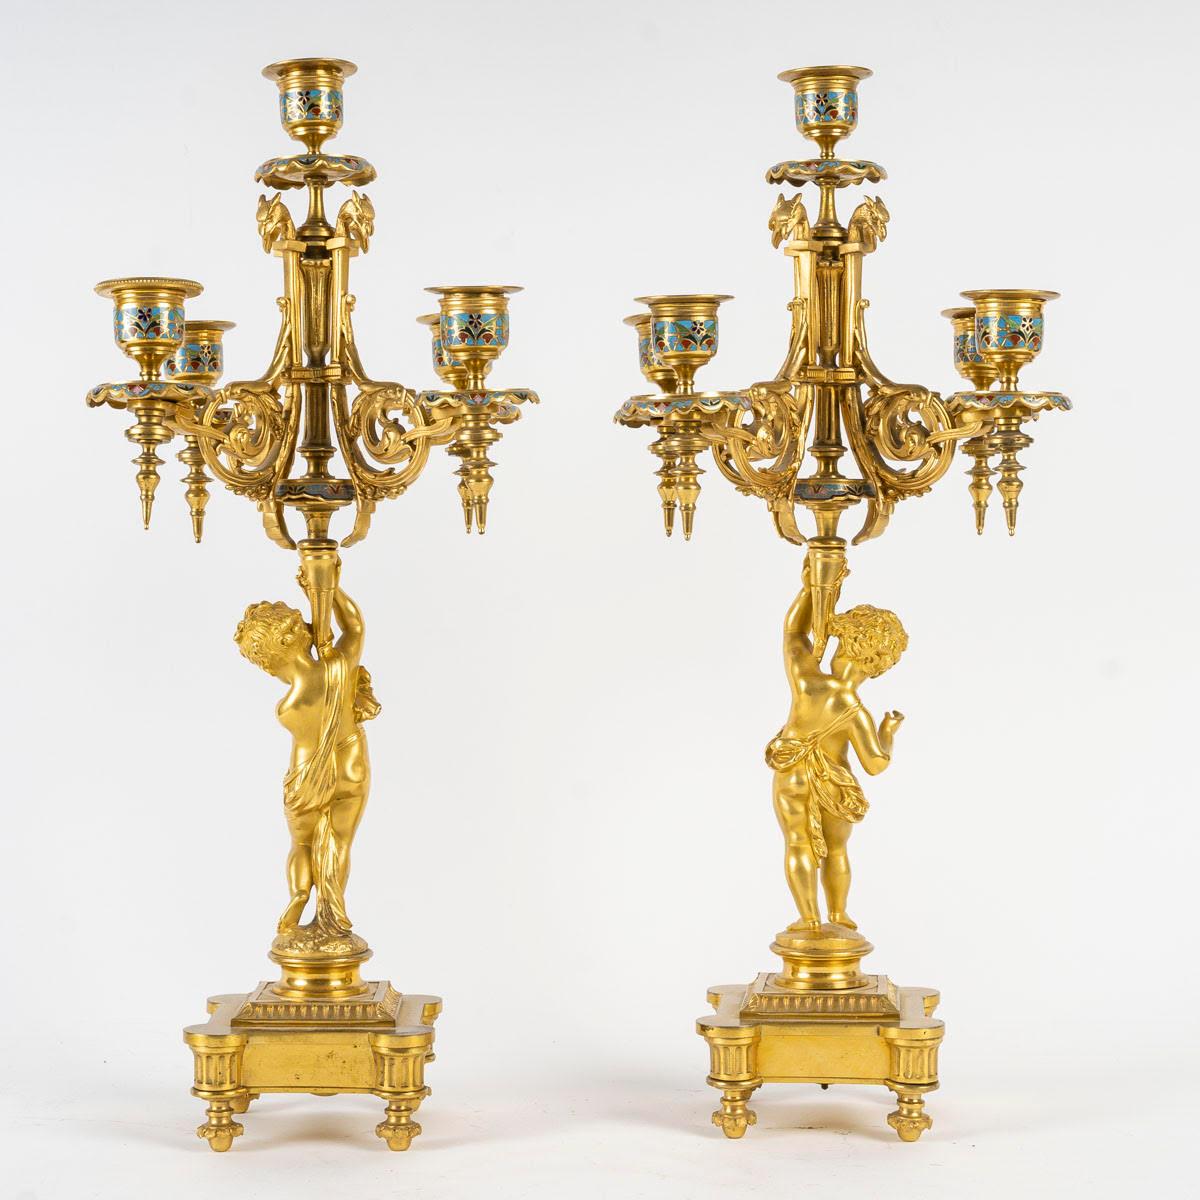 Mantelpiece and Candelabras in Gilt and Cloisonné Bronze, Napoleon Period. For Sale 1